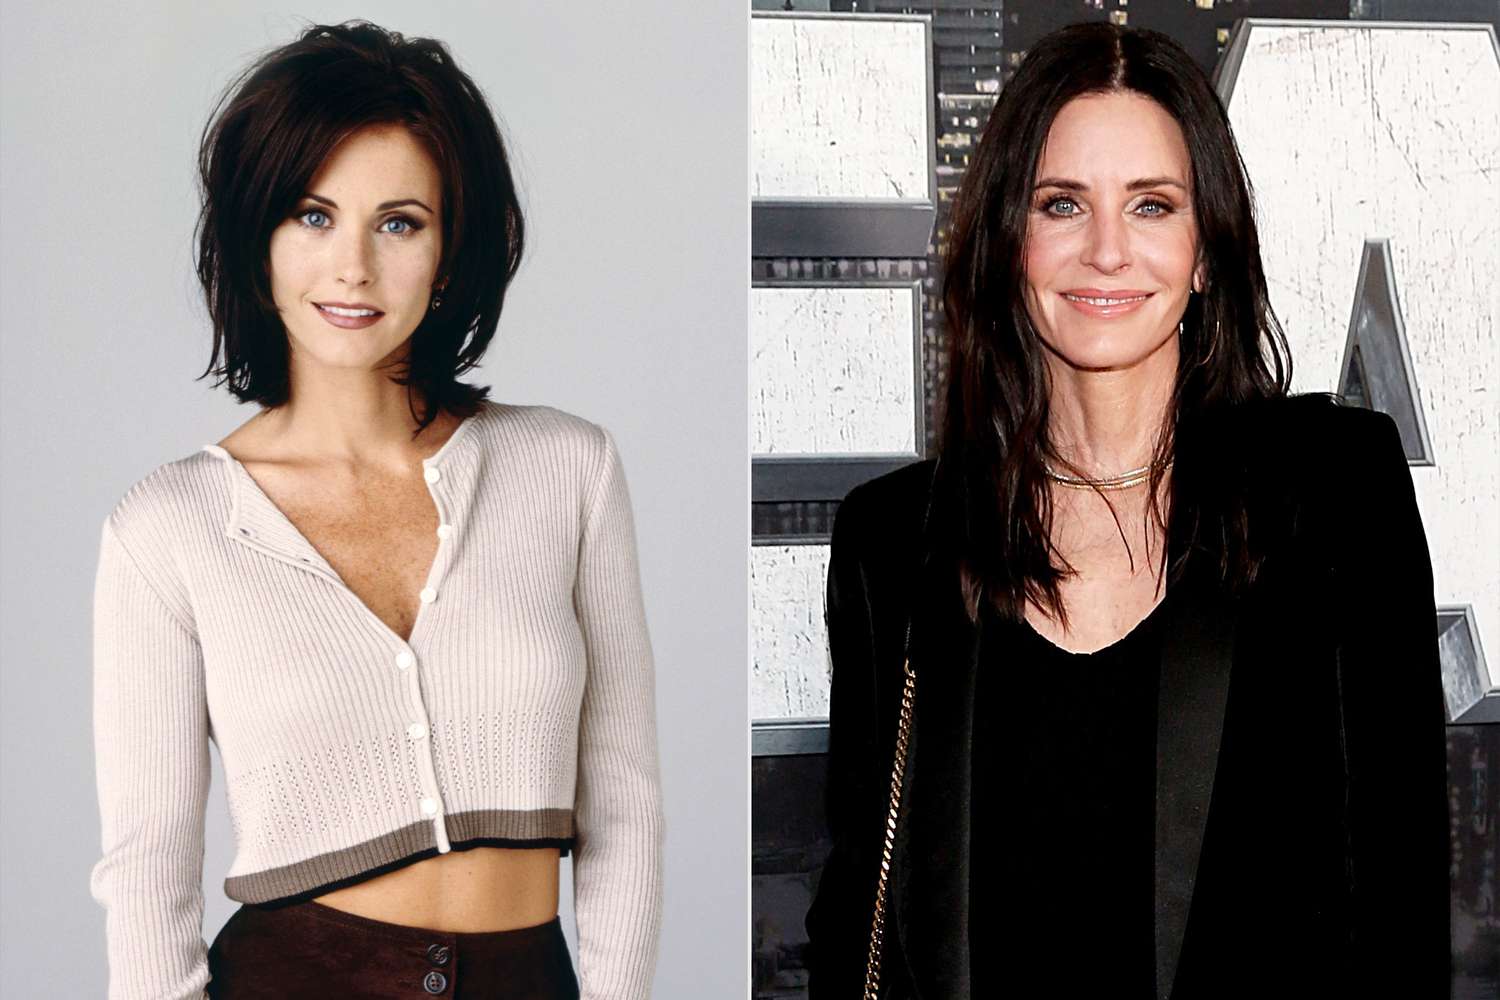 Friends cast: Where are they now Courteney Cox (Monica)